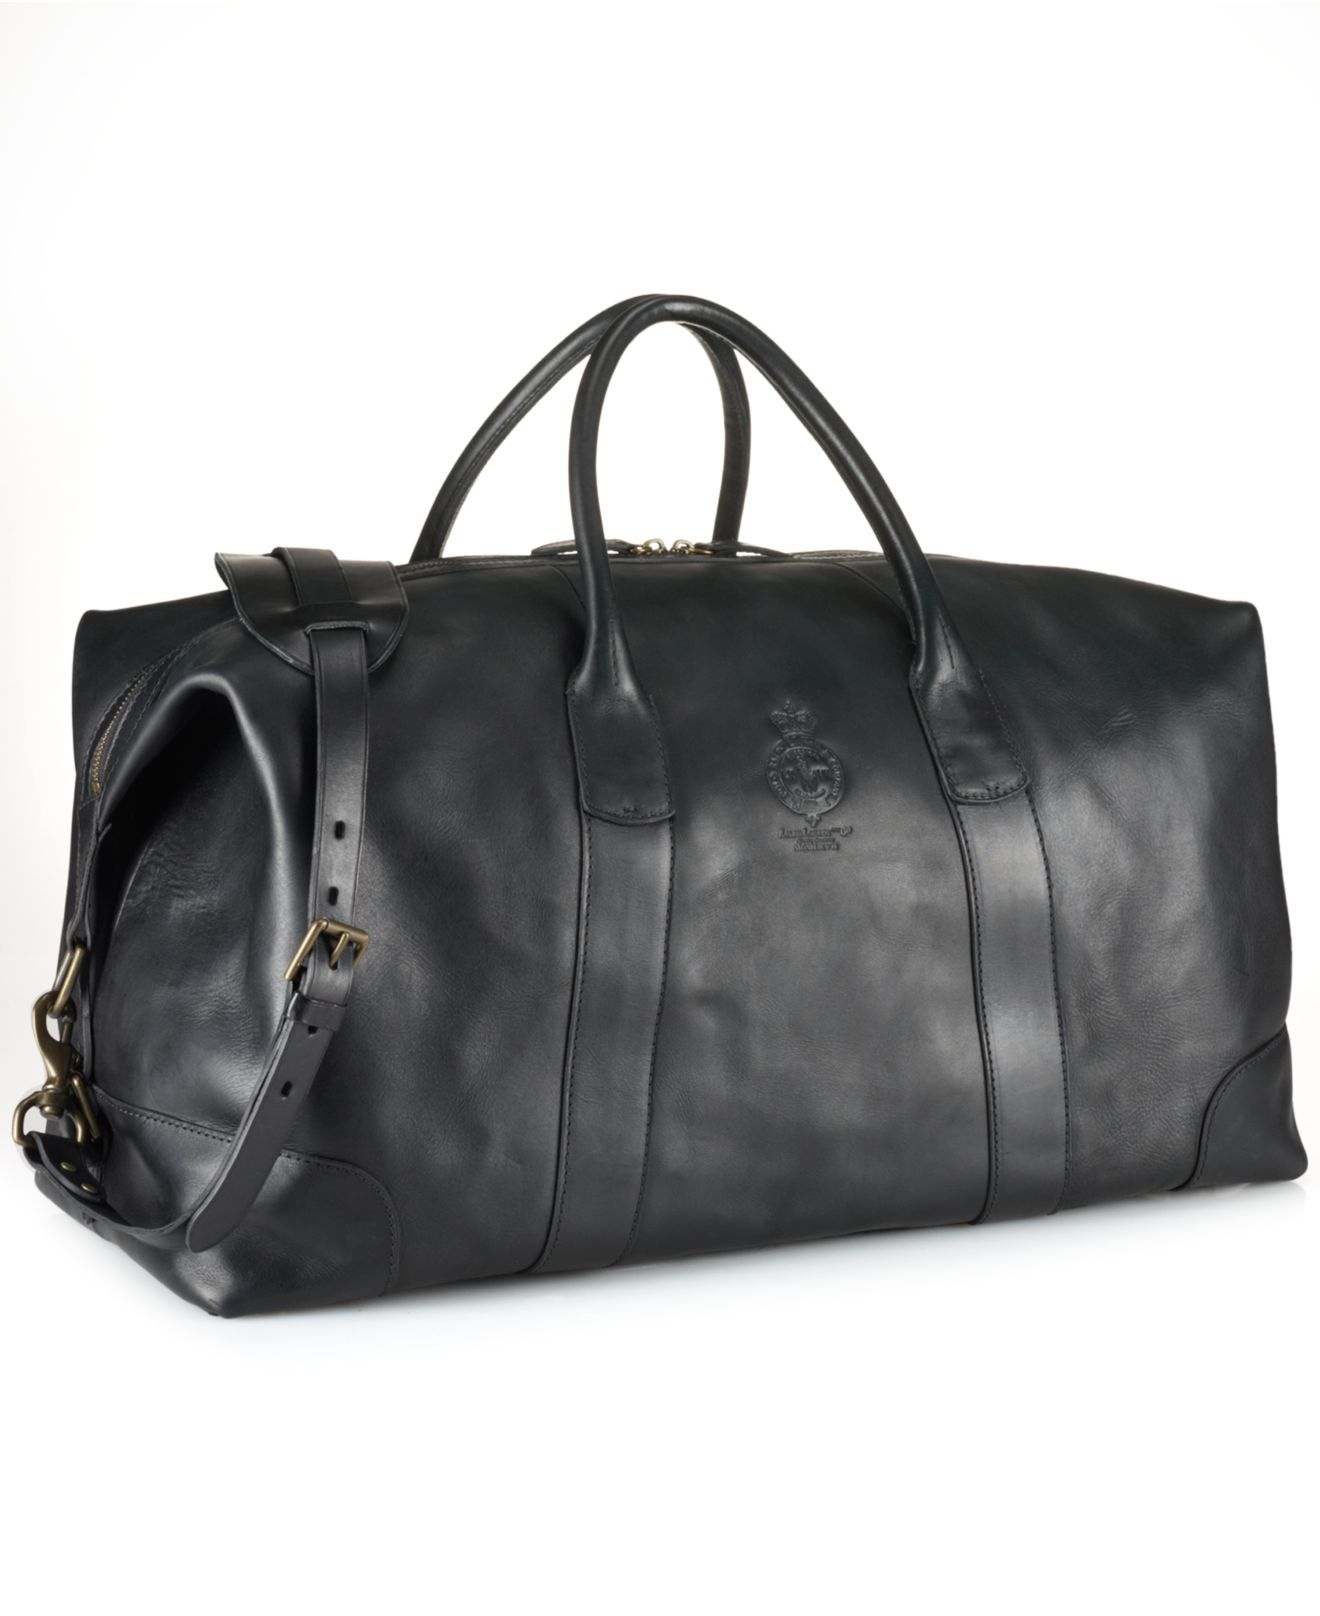 Lyst - Polo Ralph Lauren Core Leather Duffle Bag in Black for Men